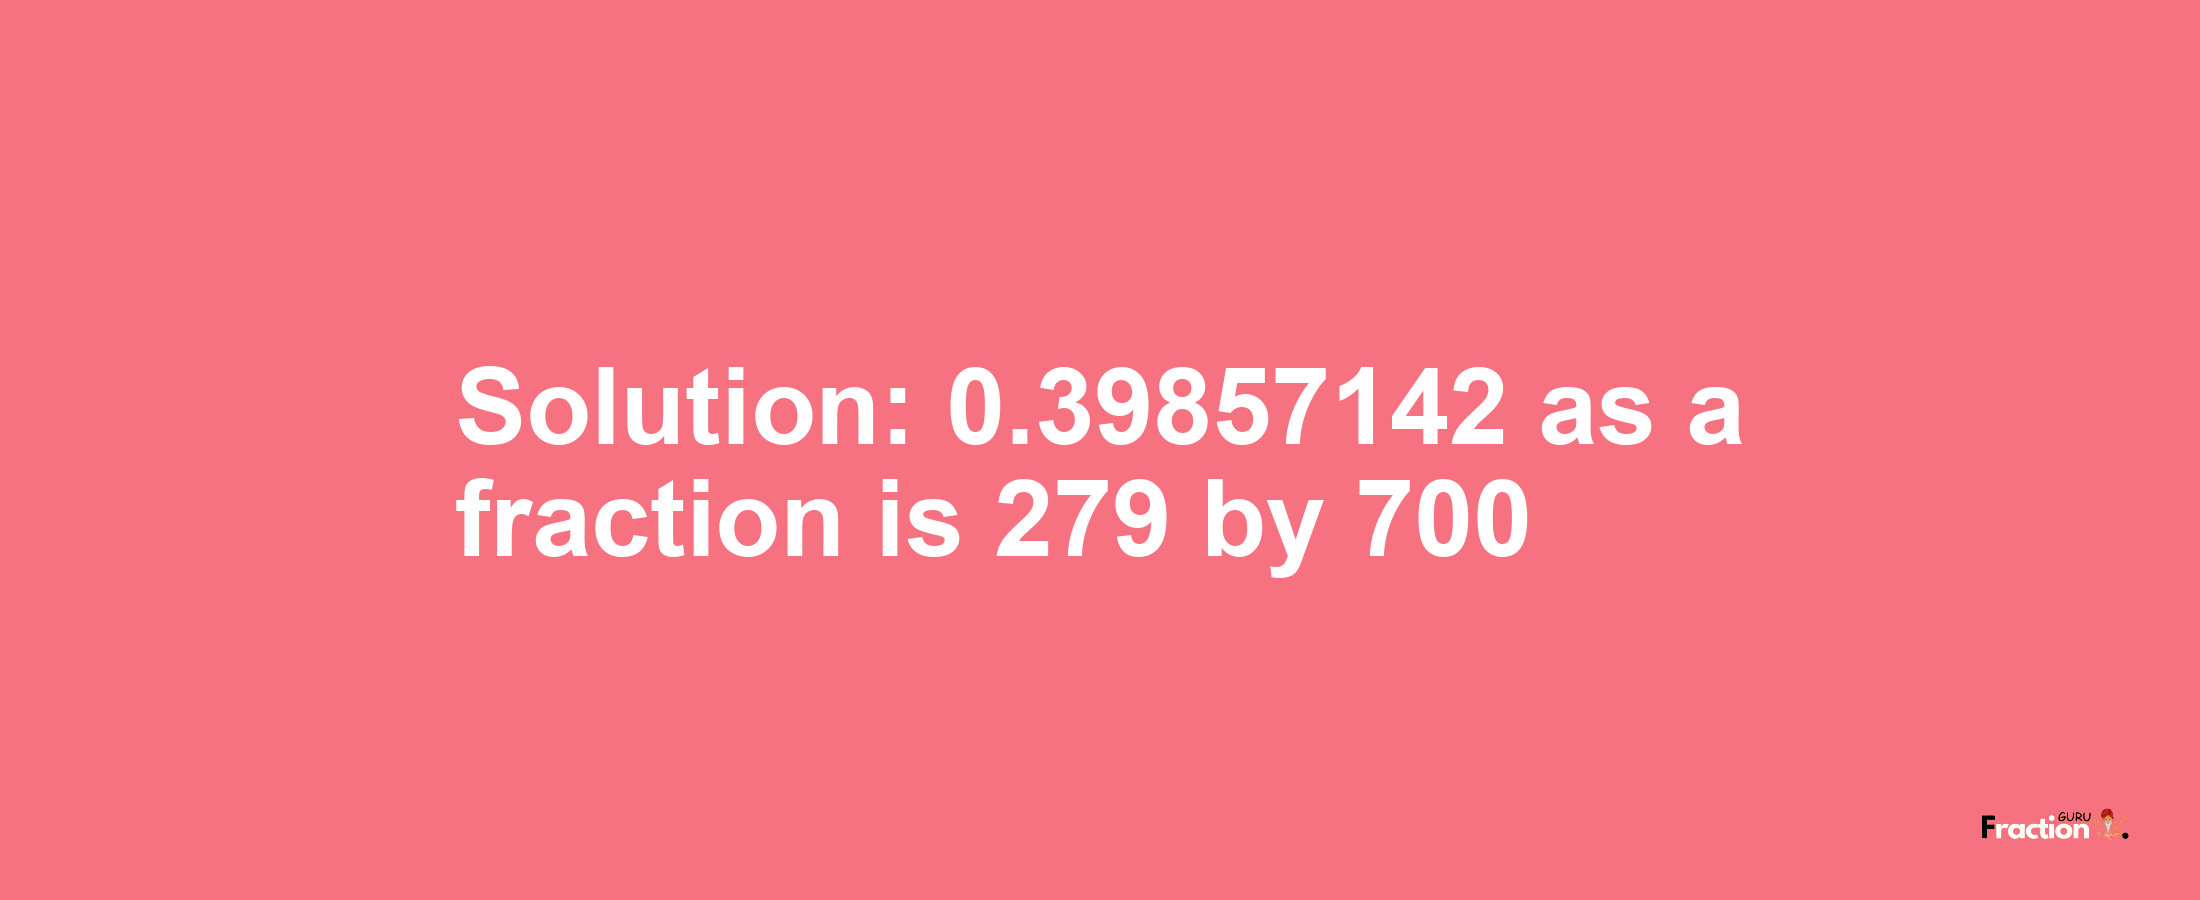 Solution:0.39857142 as a fraction is 279/700